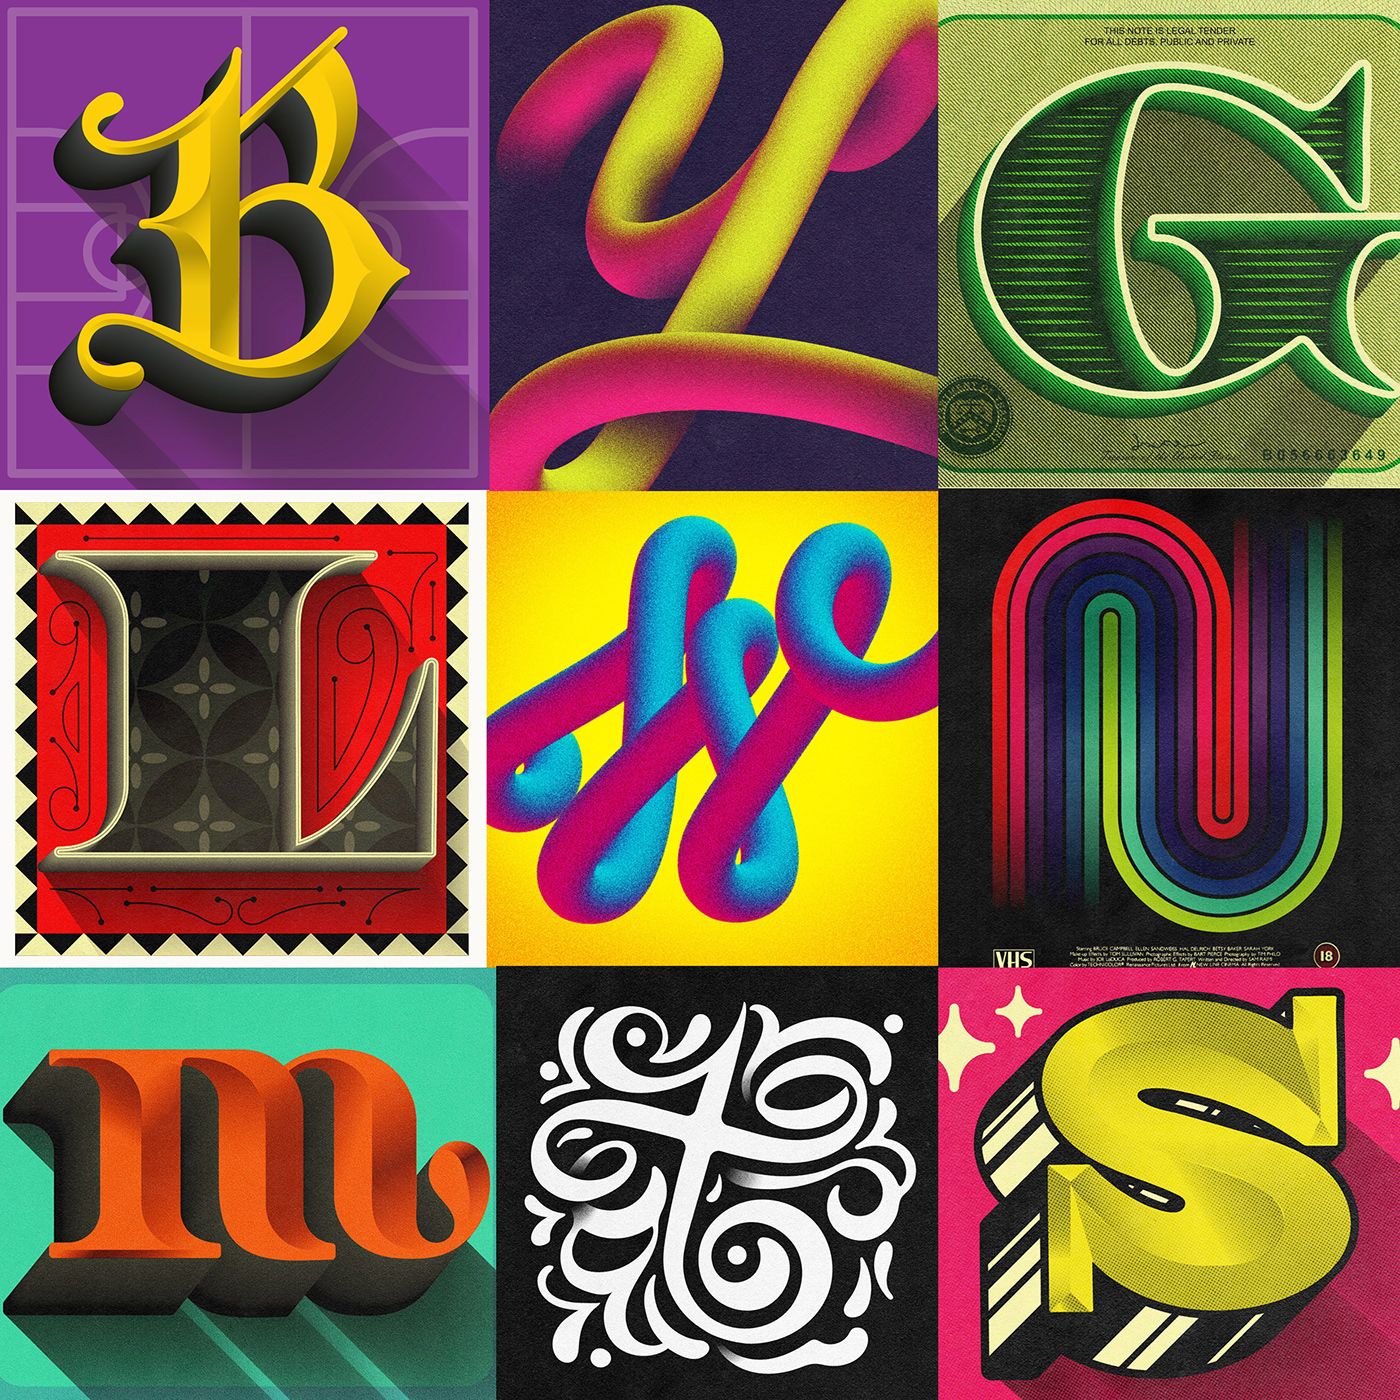 36daysoftype 3D typography freelance letterer illustrated type illustrated typography lettering Pop Art pop culture type vector type